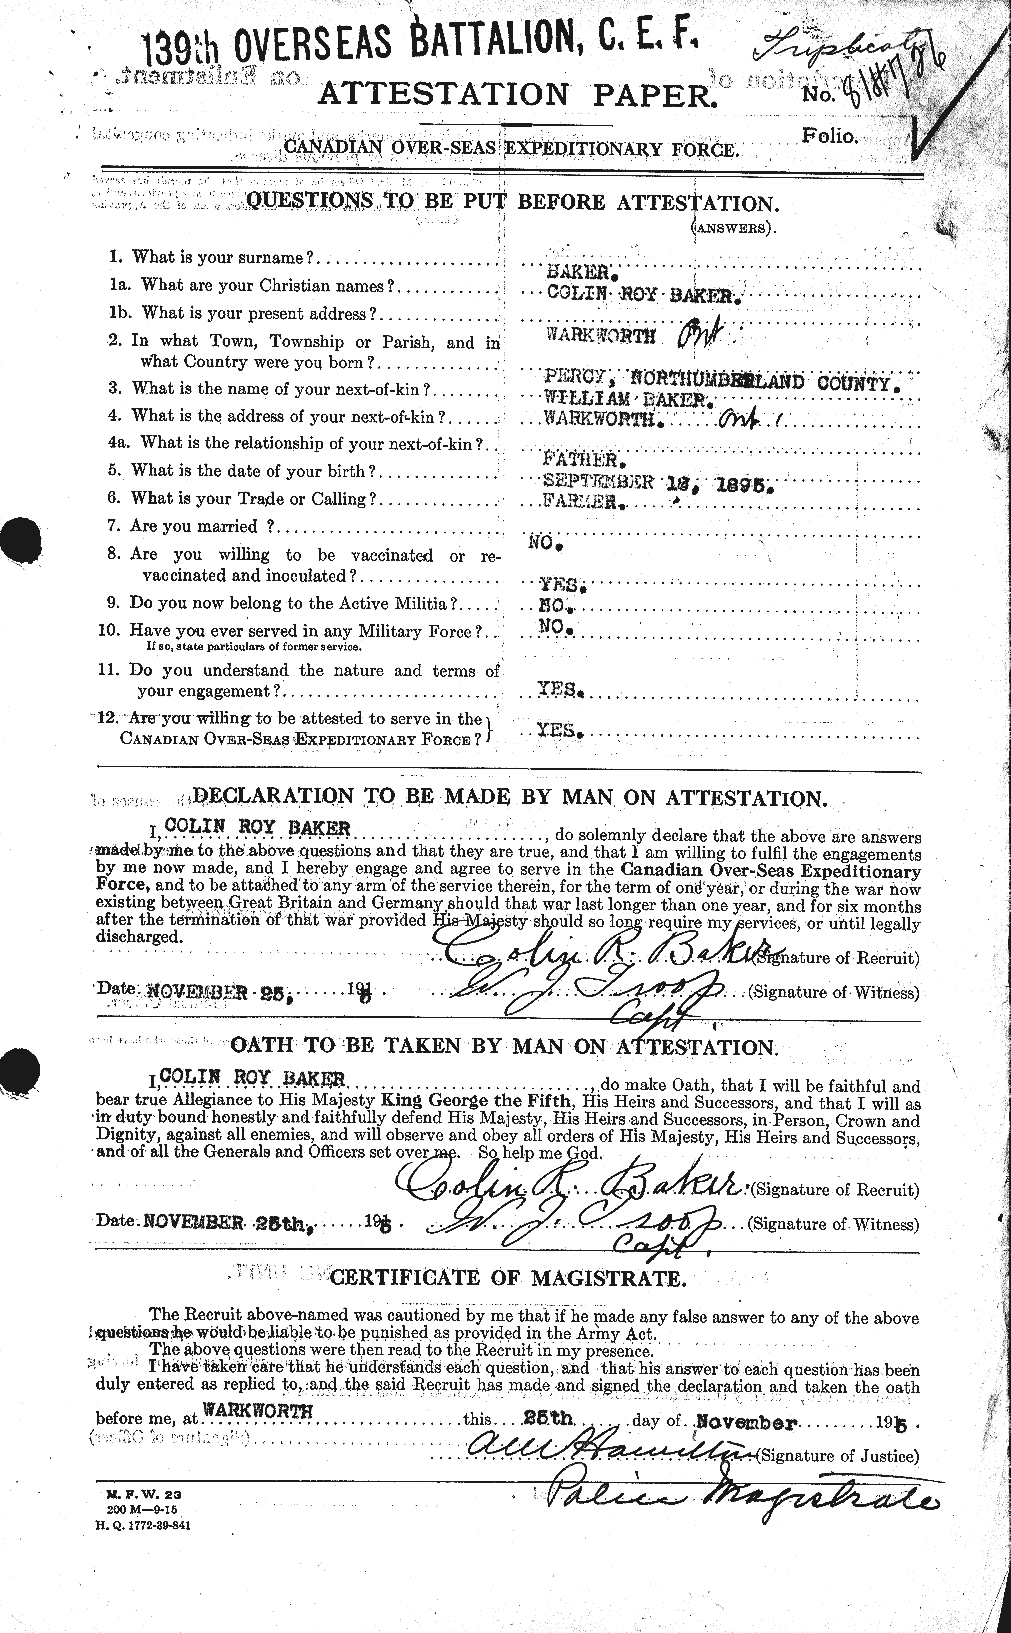 Personnel Records of the First World War - CEF 216416a